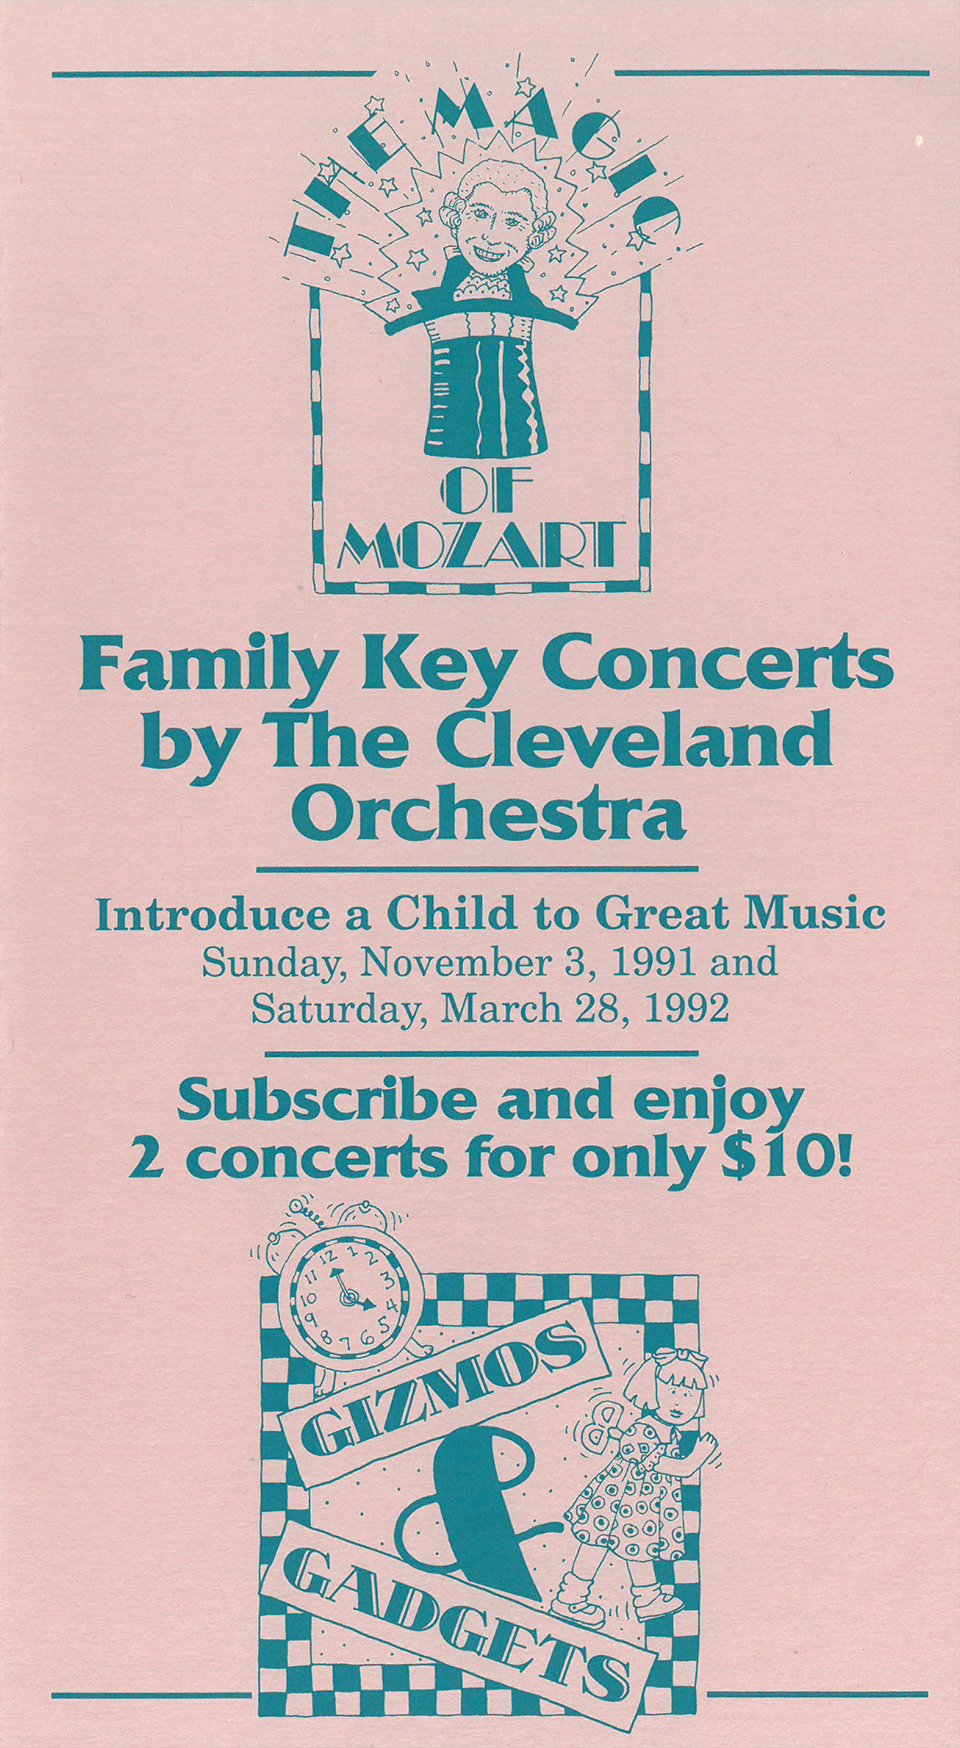 The Magic of Mozart: Family Key Concerts by The Cleveland Orchestra